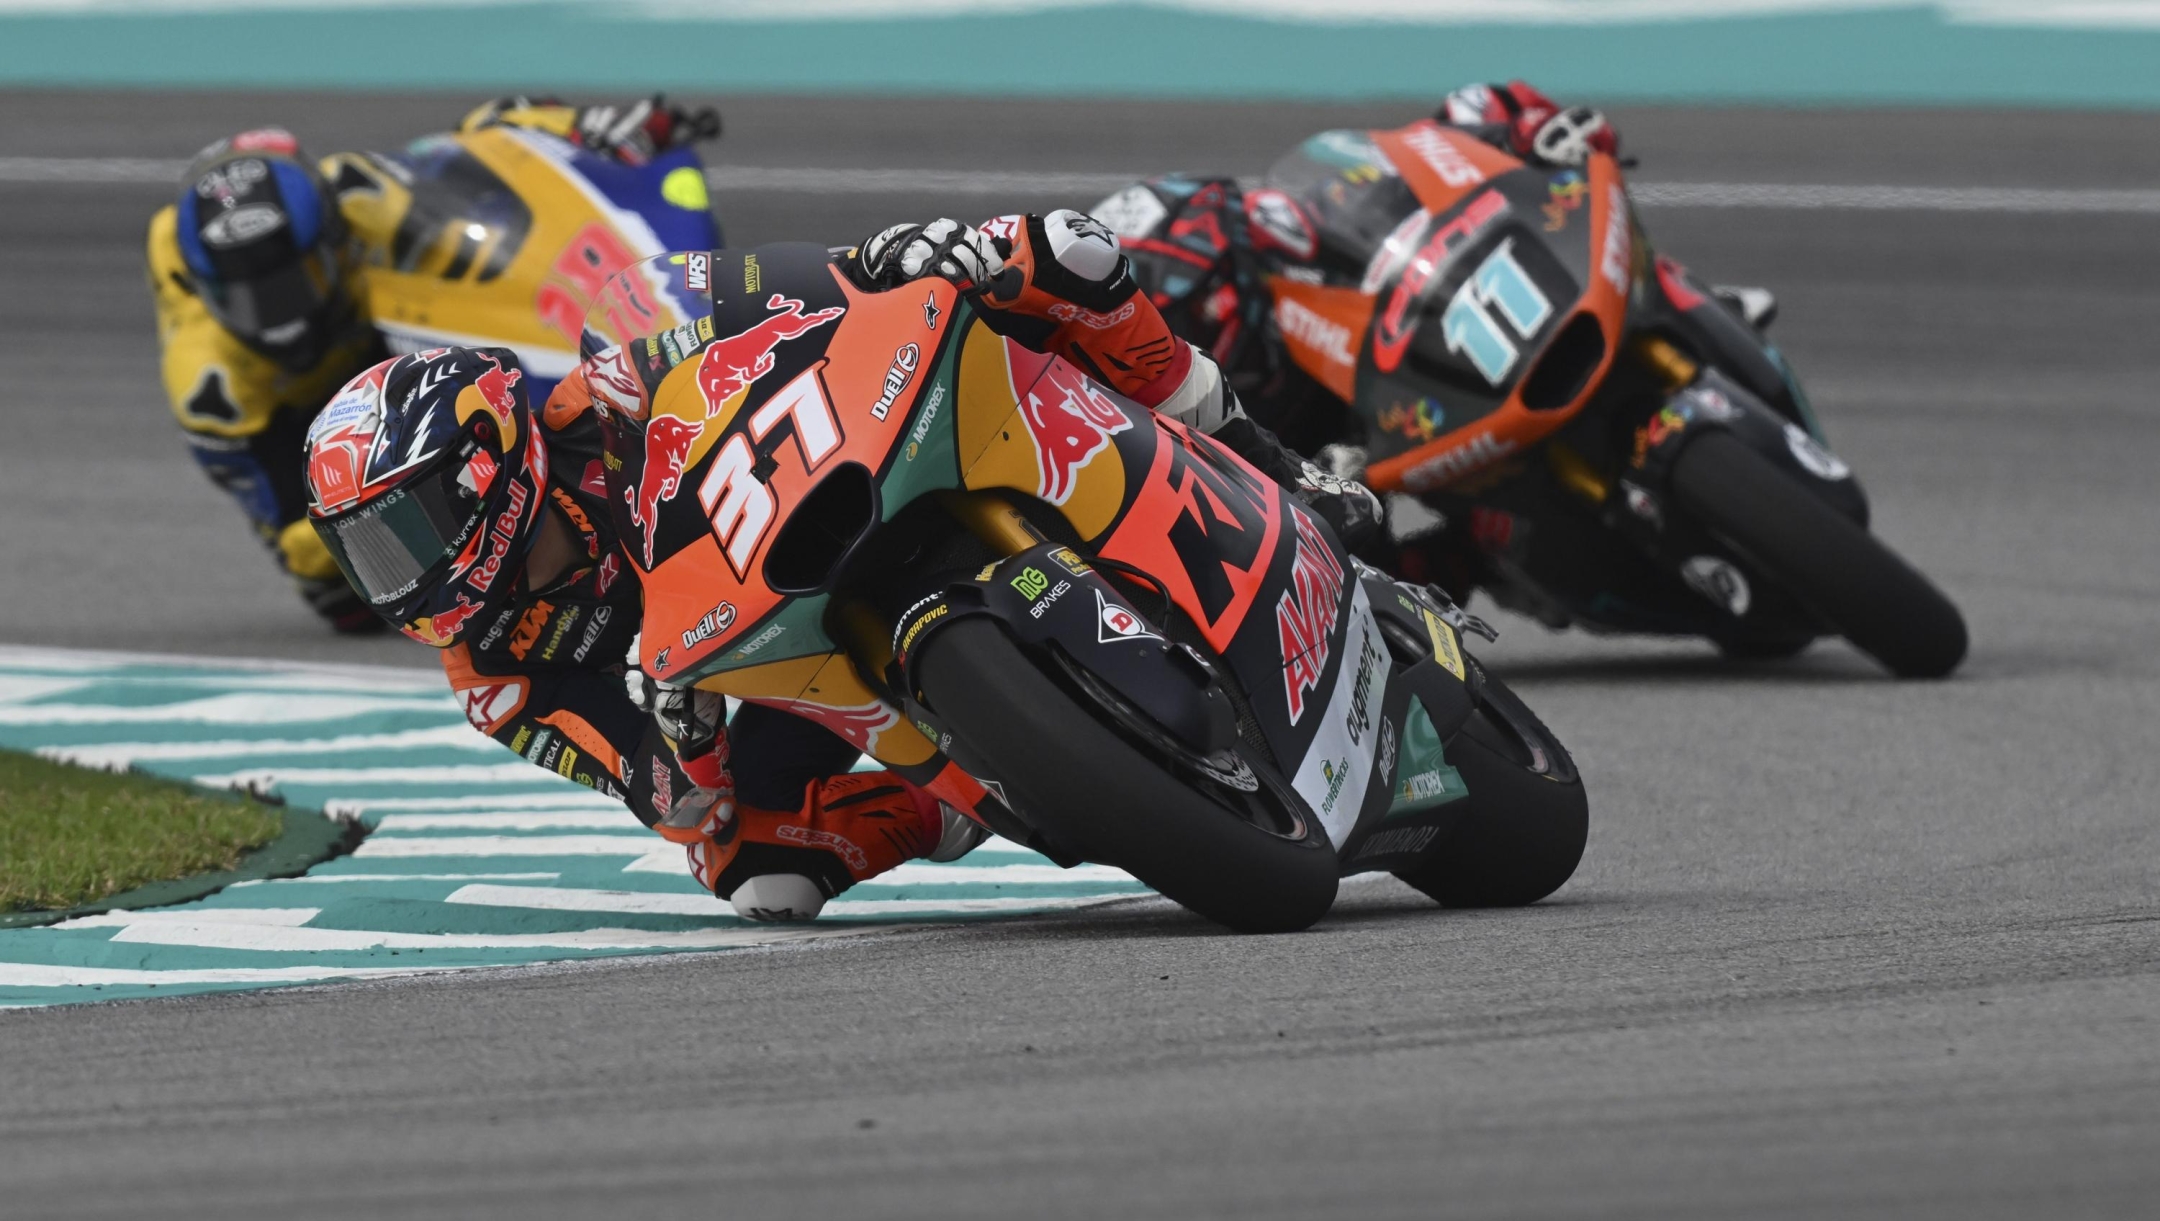 KUALA LUMPUR, MALAYSIA - NOVEMBER 11: Pedro Acosta of Spain and Red Bull KTM Ajo leads the field during the Moto2 Grand Prix of Malaysia - Qualifying at Sepang Circuit on November 11, 2023 in Kuala Lumpur, Malaysia. (Photo by Mirco Lazzari gp/Getty Images)